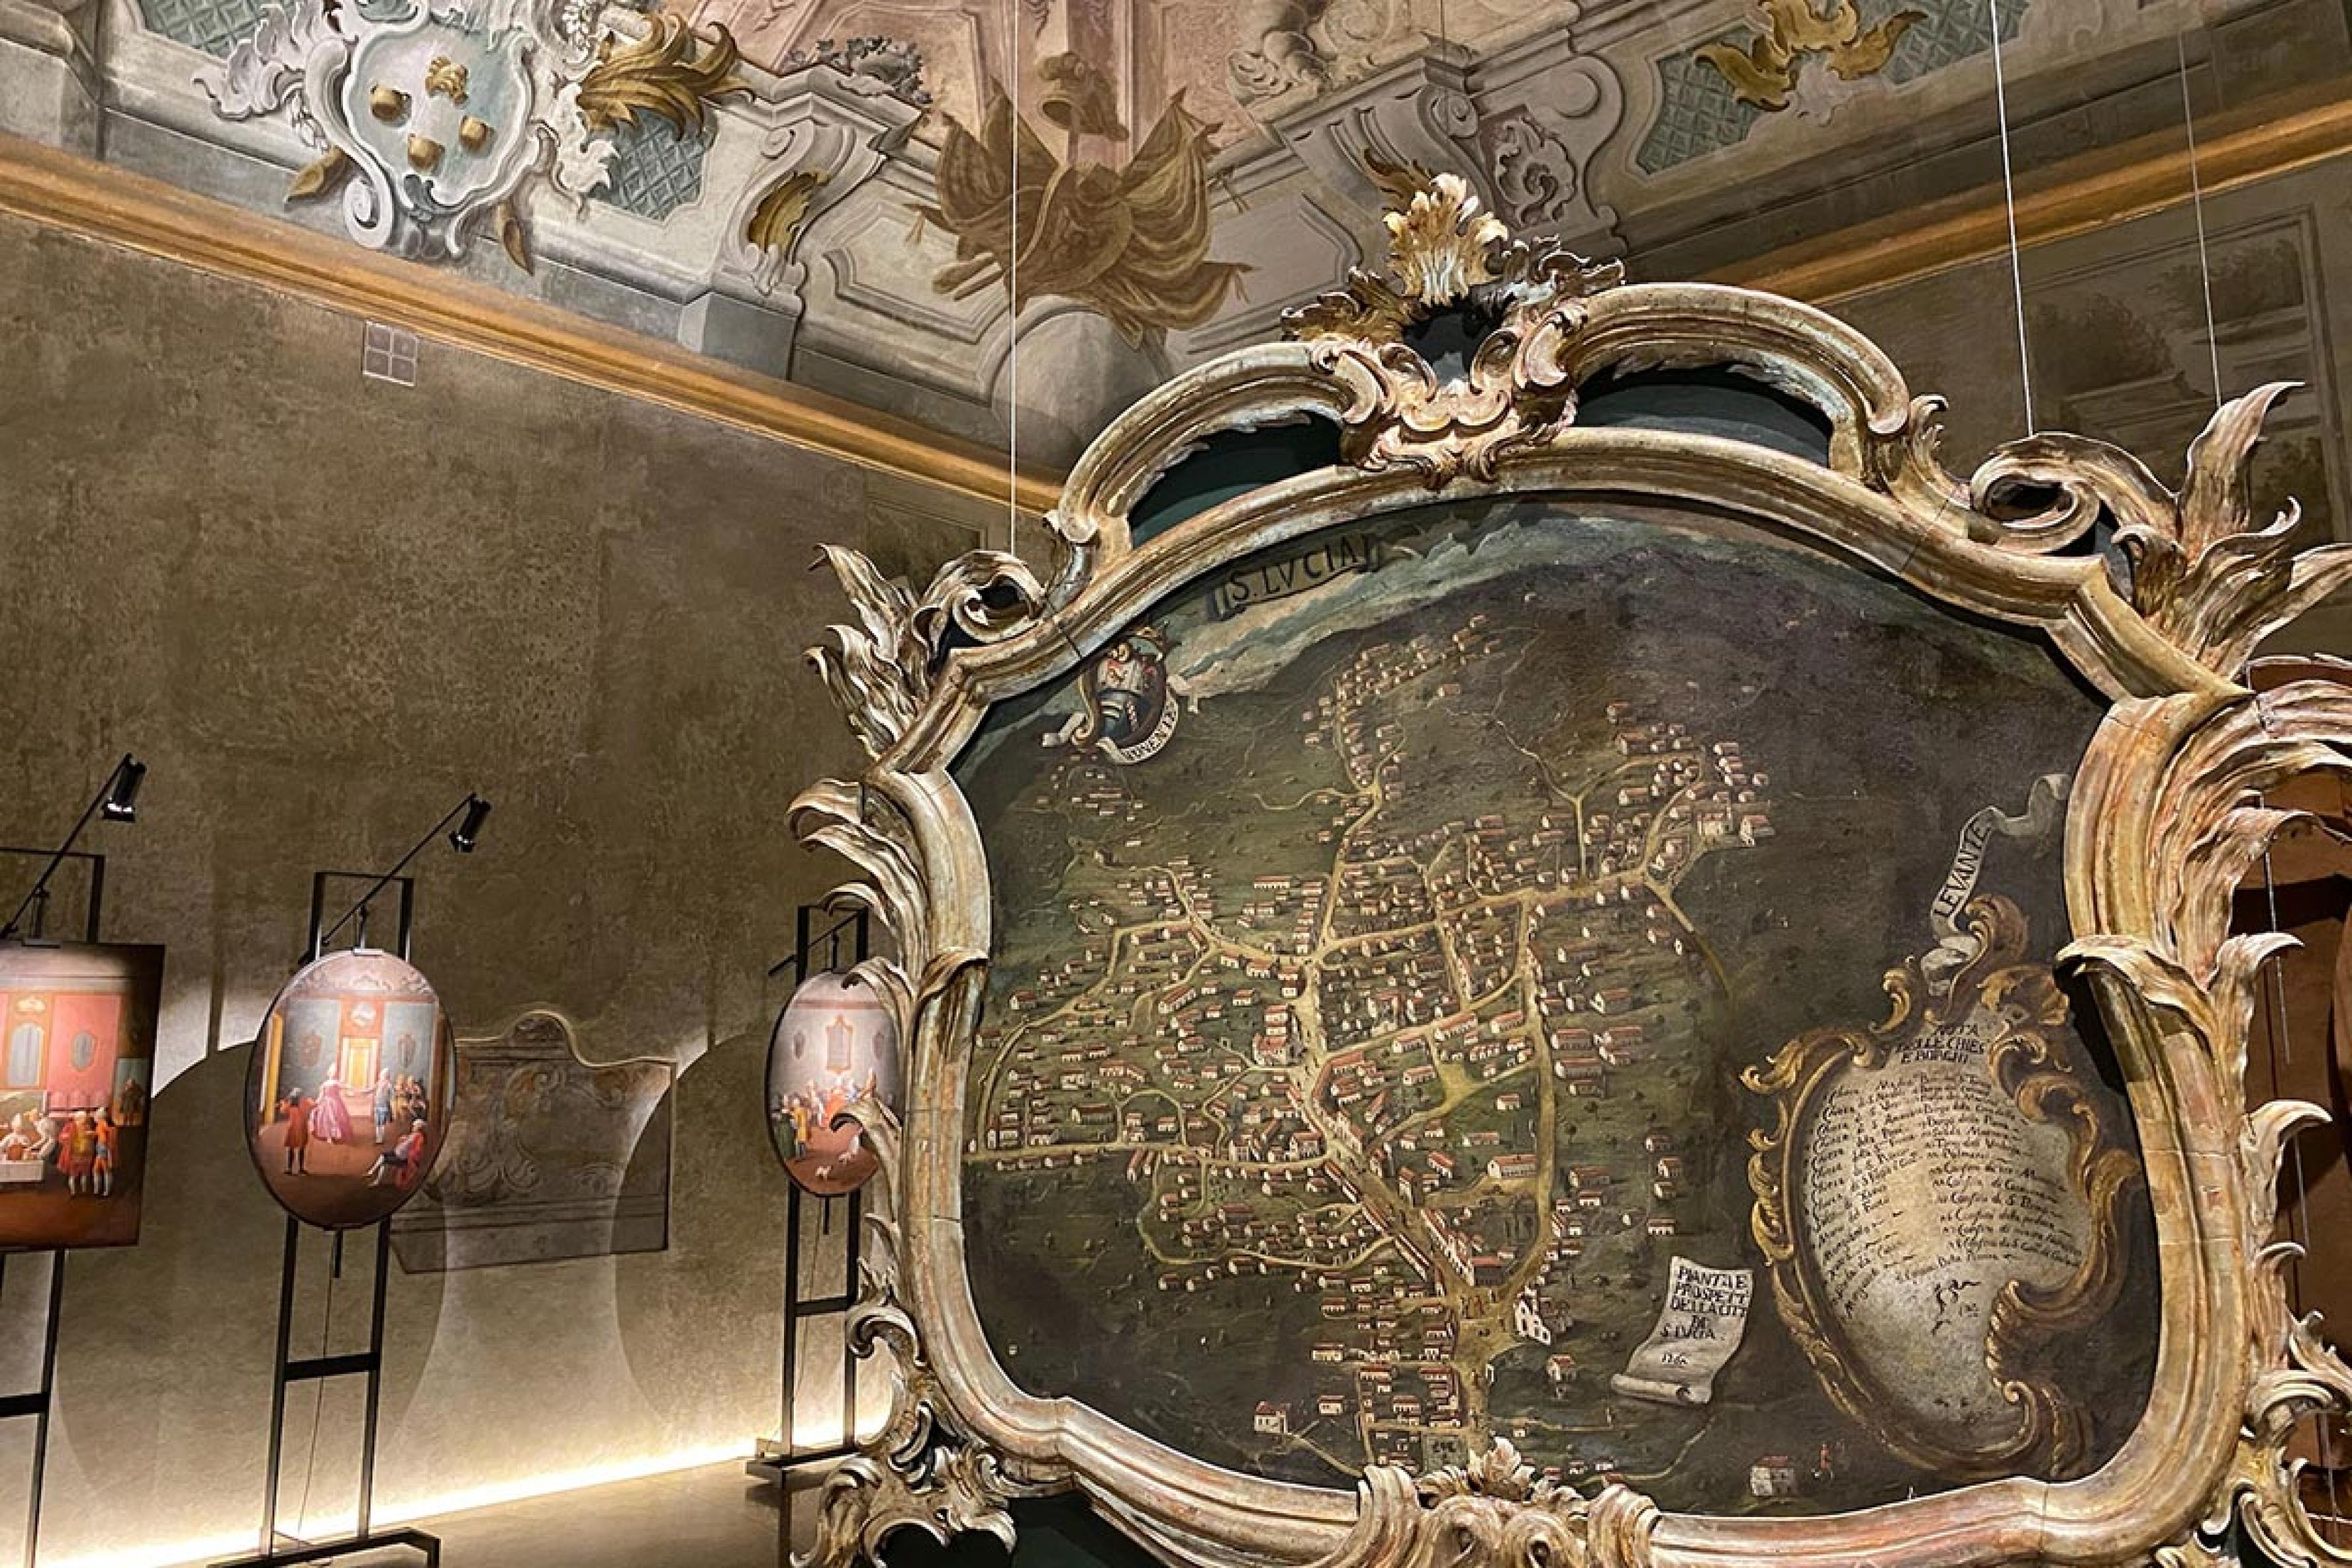 historic map in a gilded frame inside an art gallery with baroque vaulted ceiling